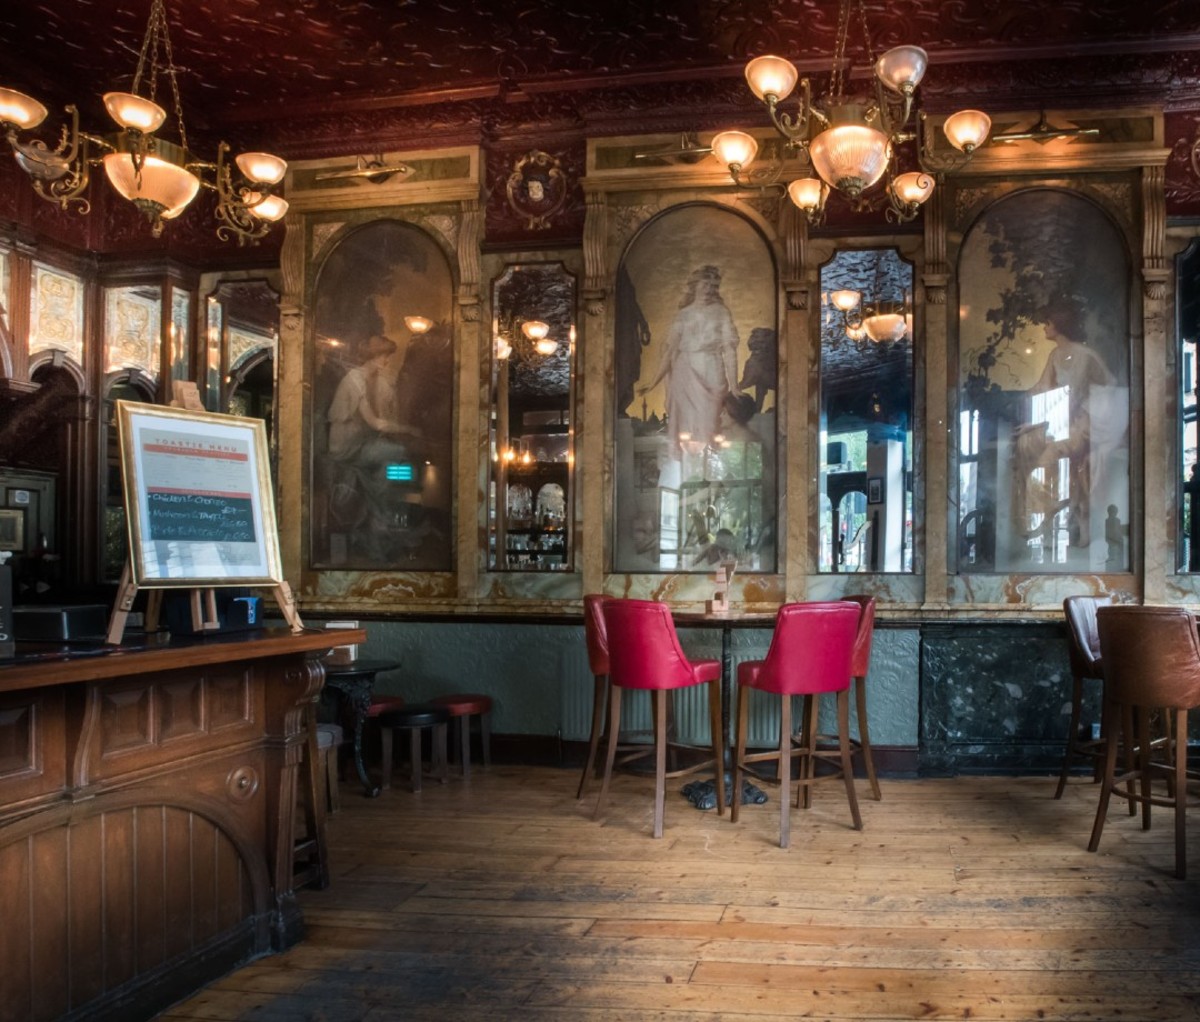 Interior of the Viaduct Tavern in London